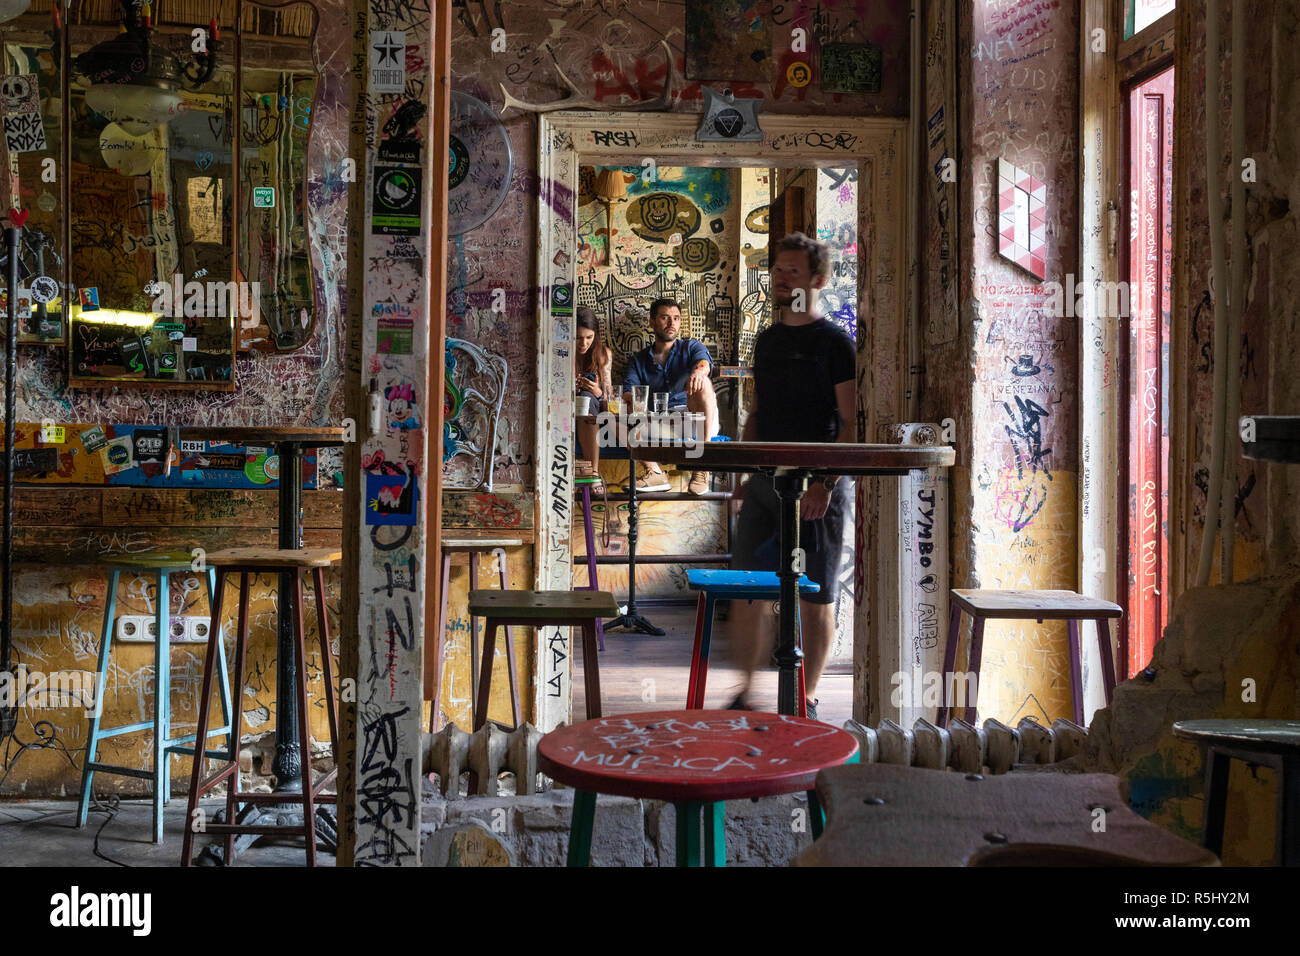 BUDAPEST, HUNGARY - August 12, 2018: Pub interiors with tattered vintage furniture in Szimpla kert ruin pub, a popular tourist destinations in Hungary Stock Photo